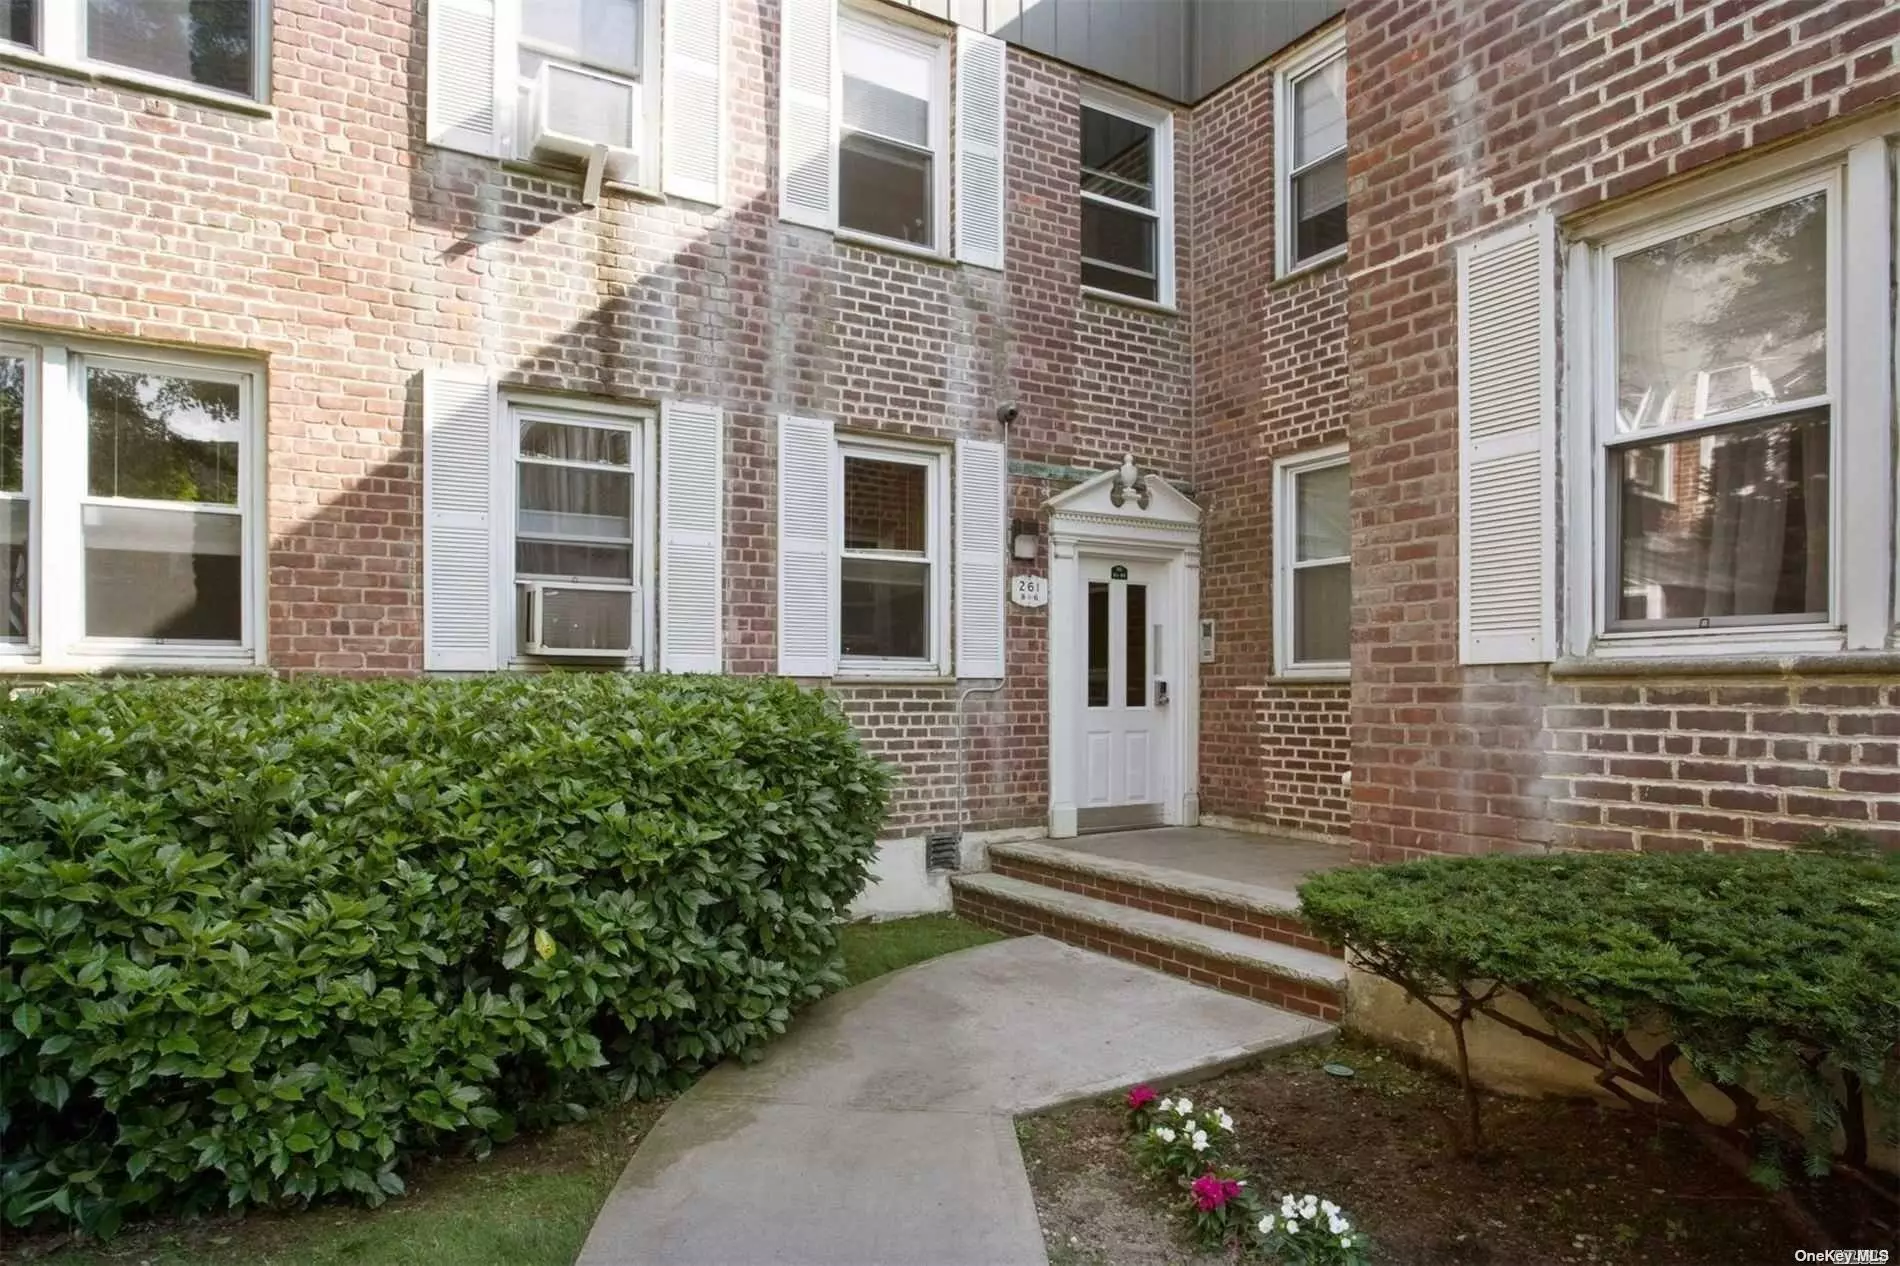 A rare opportunity to own a ground floor apartment right in the heart of the famed town of Cedarhurst overlooking Cedarhurst park. Whether you are just starting to live on your own or down sizing this apartment is suitable for you! Easy living all one floor and steps away from the LIRR, busses, Central Ave, you wont even need a car to get around. Easy access and storage available underground! Don&rsquo;t let this slip away!